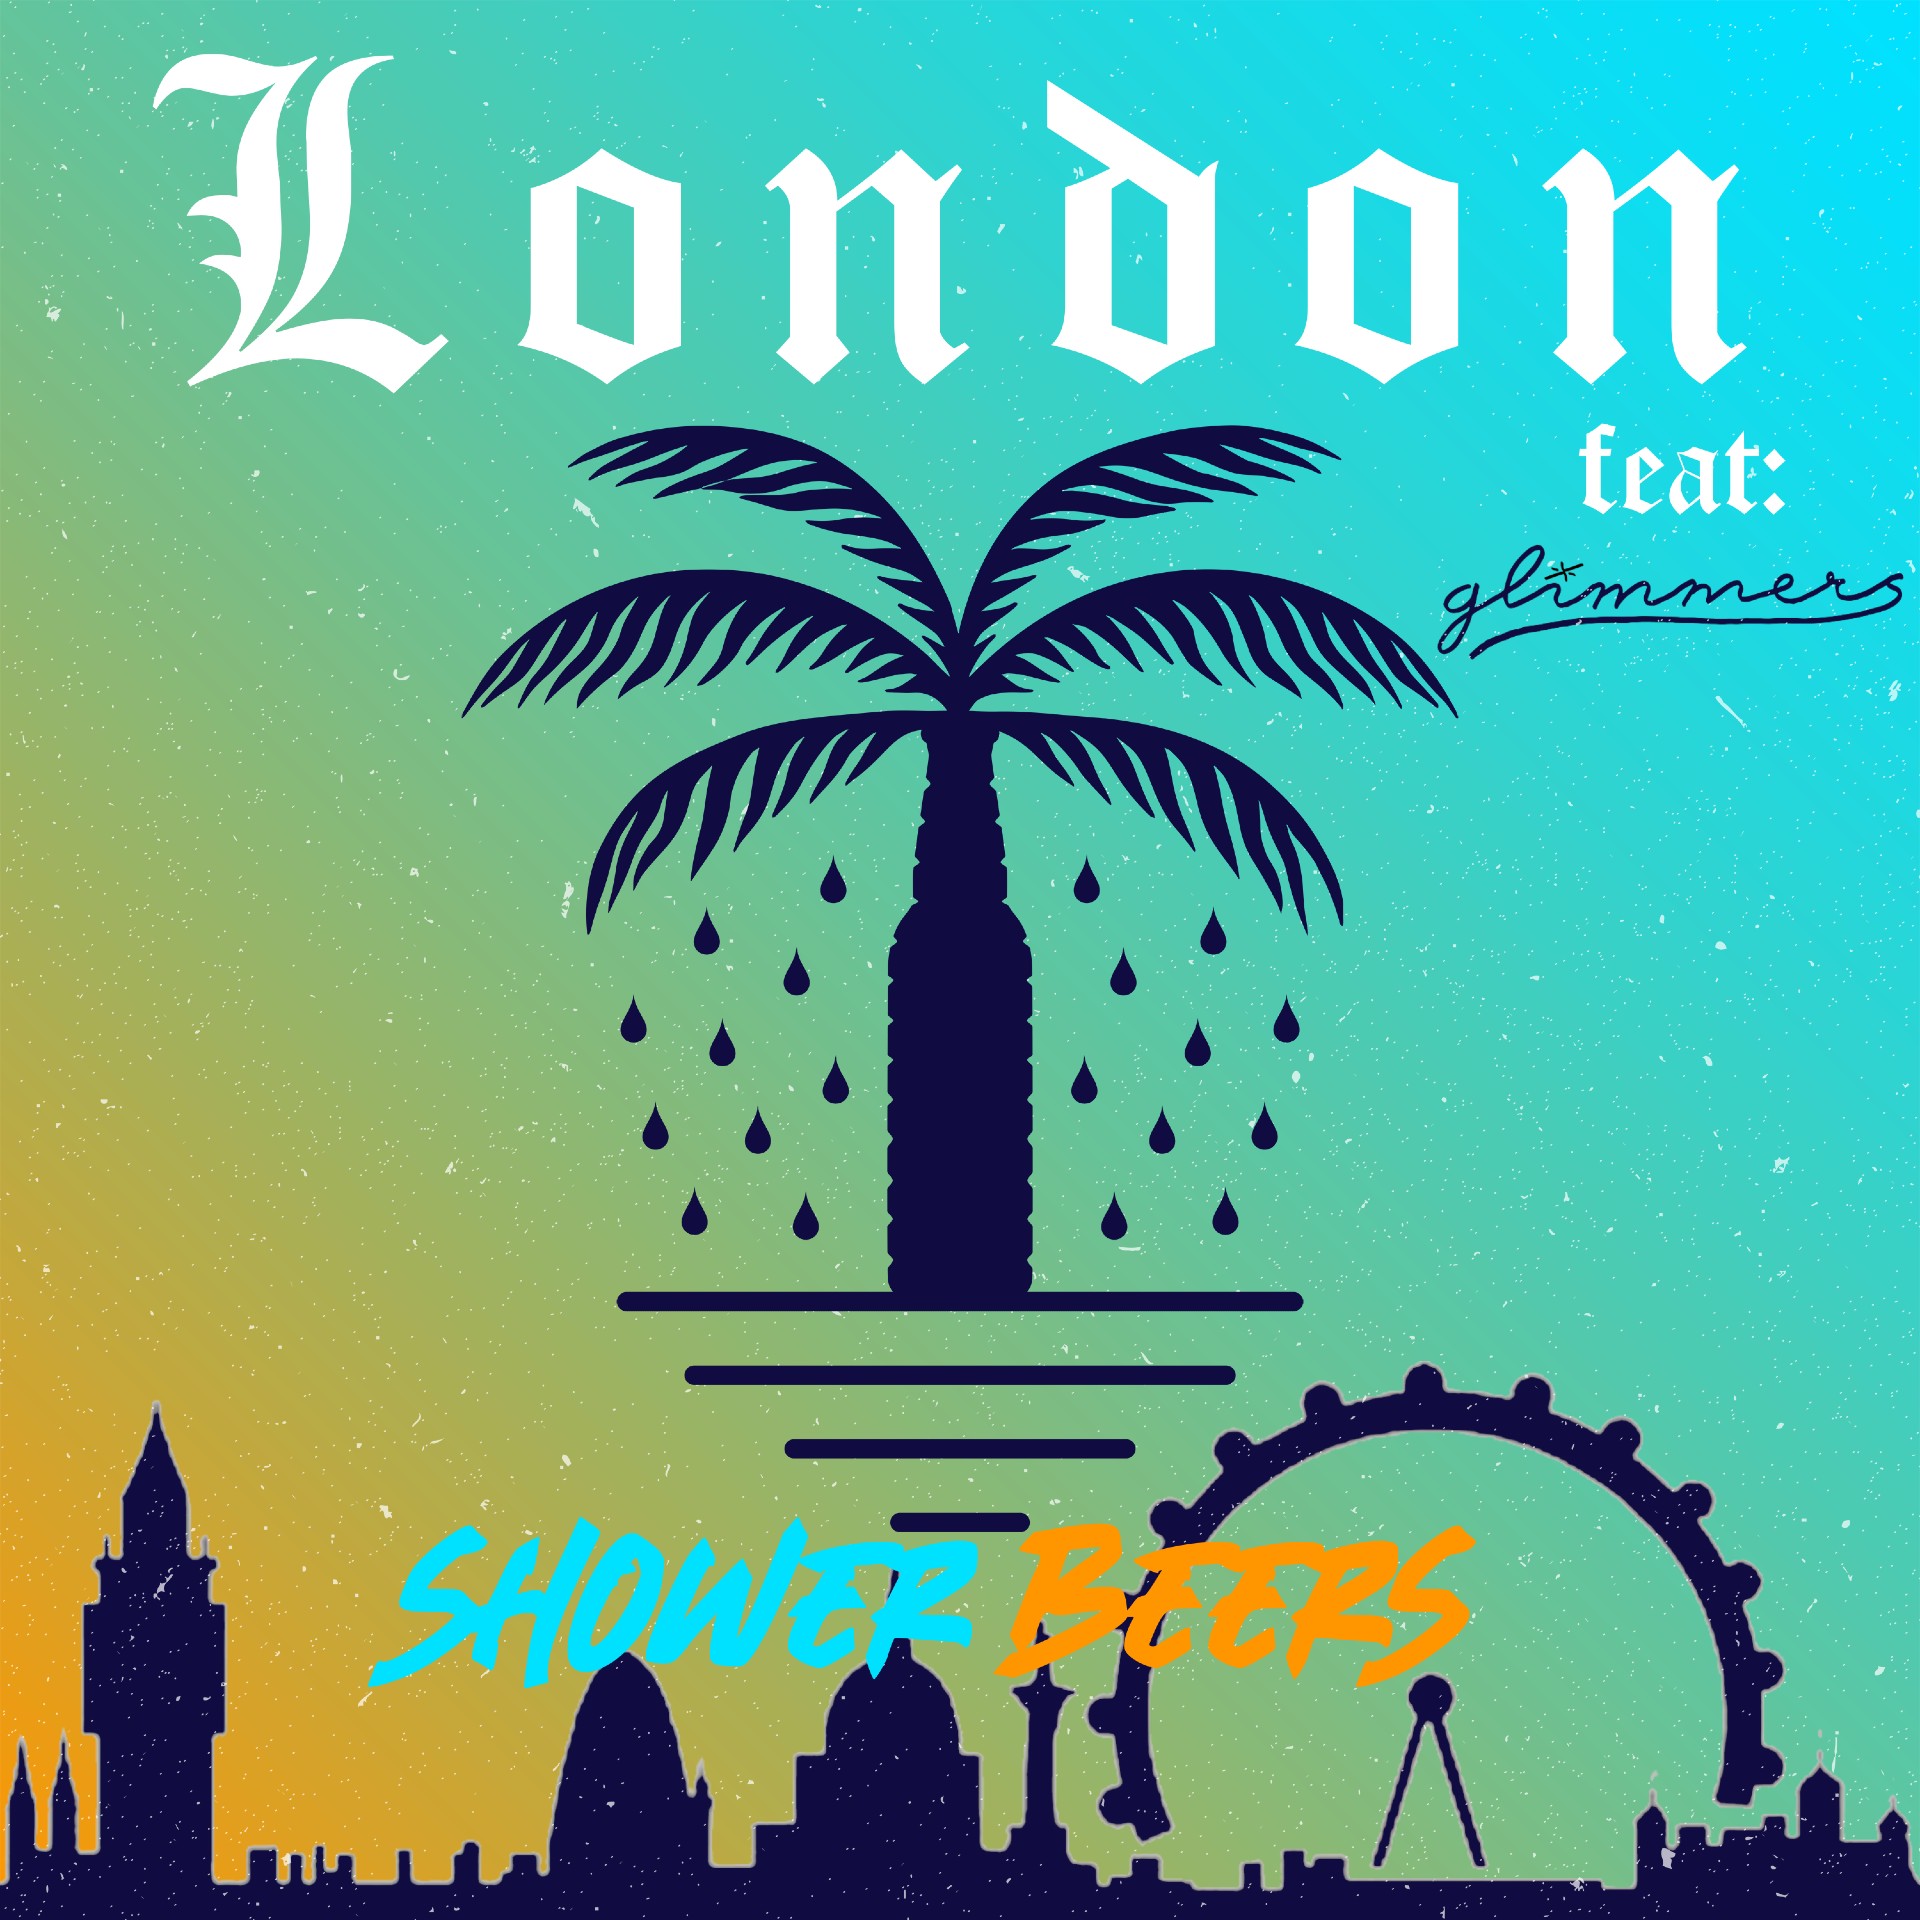 Shower Beers “London” (ft. glimmers) single artwork